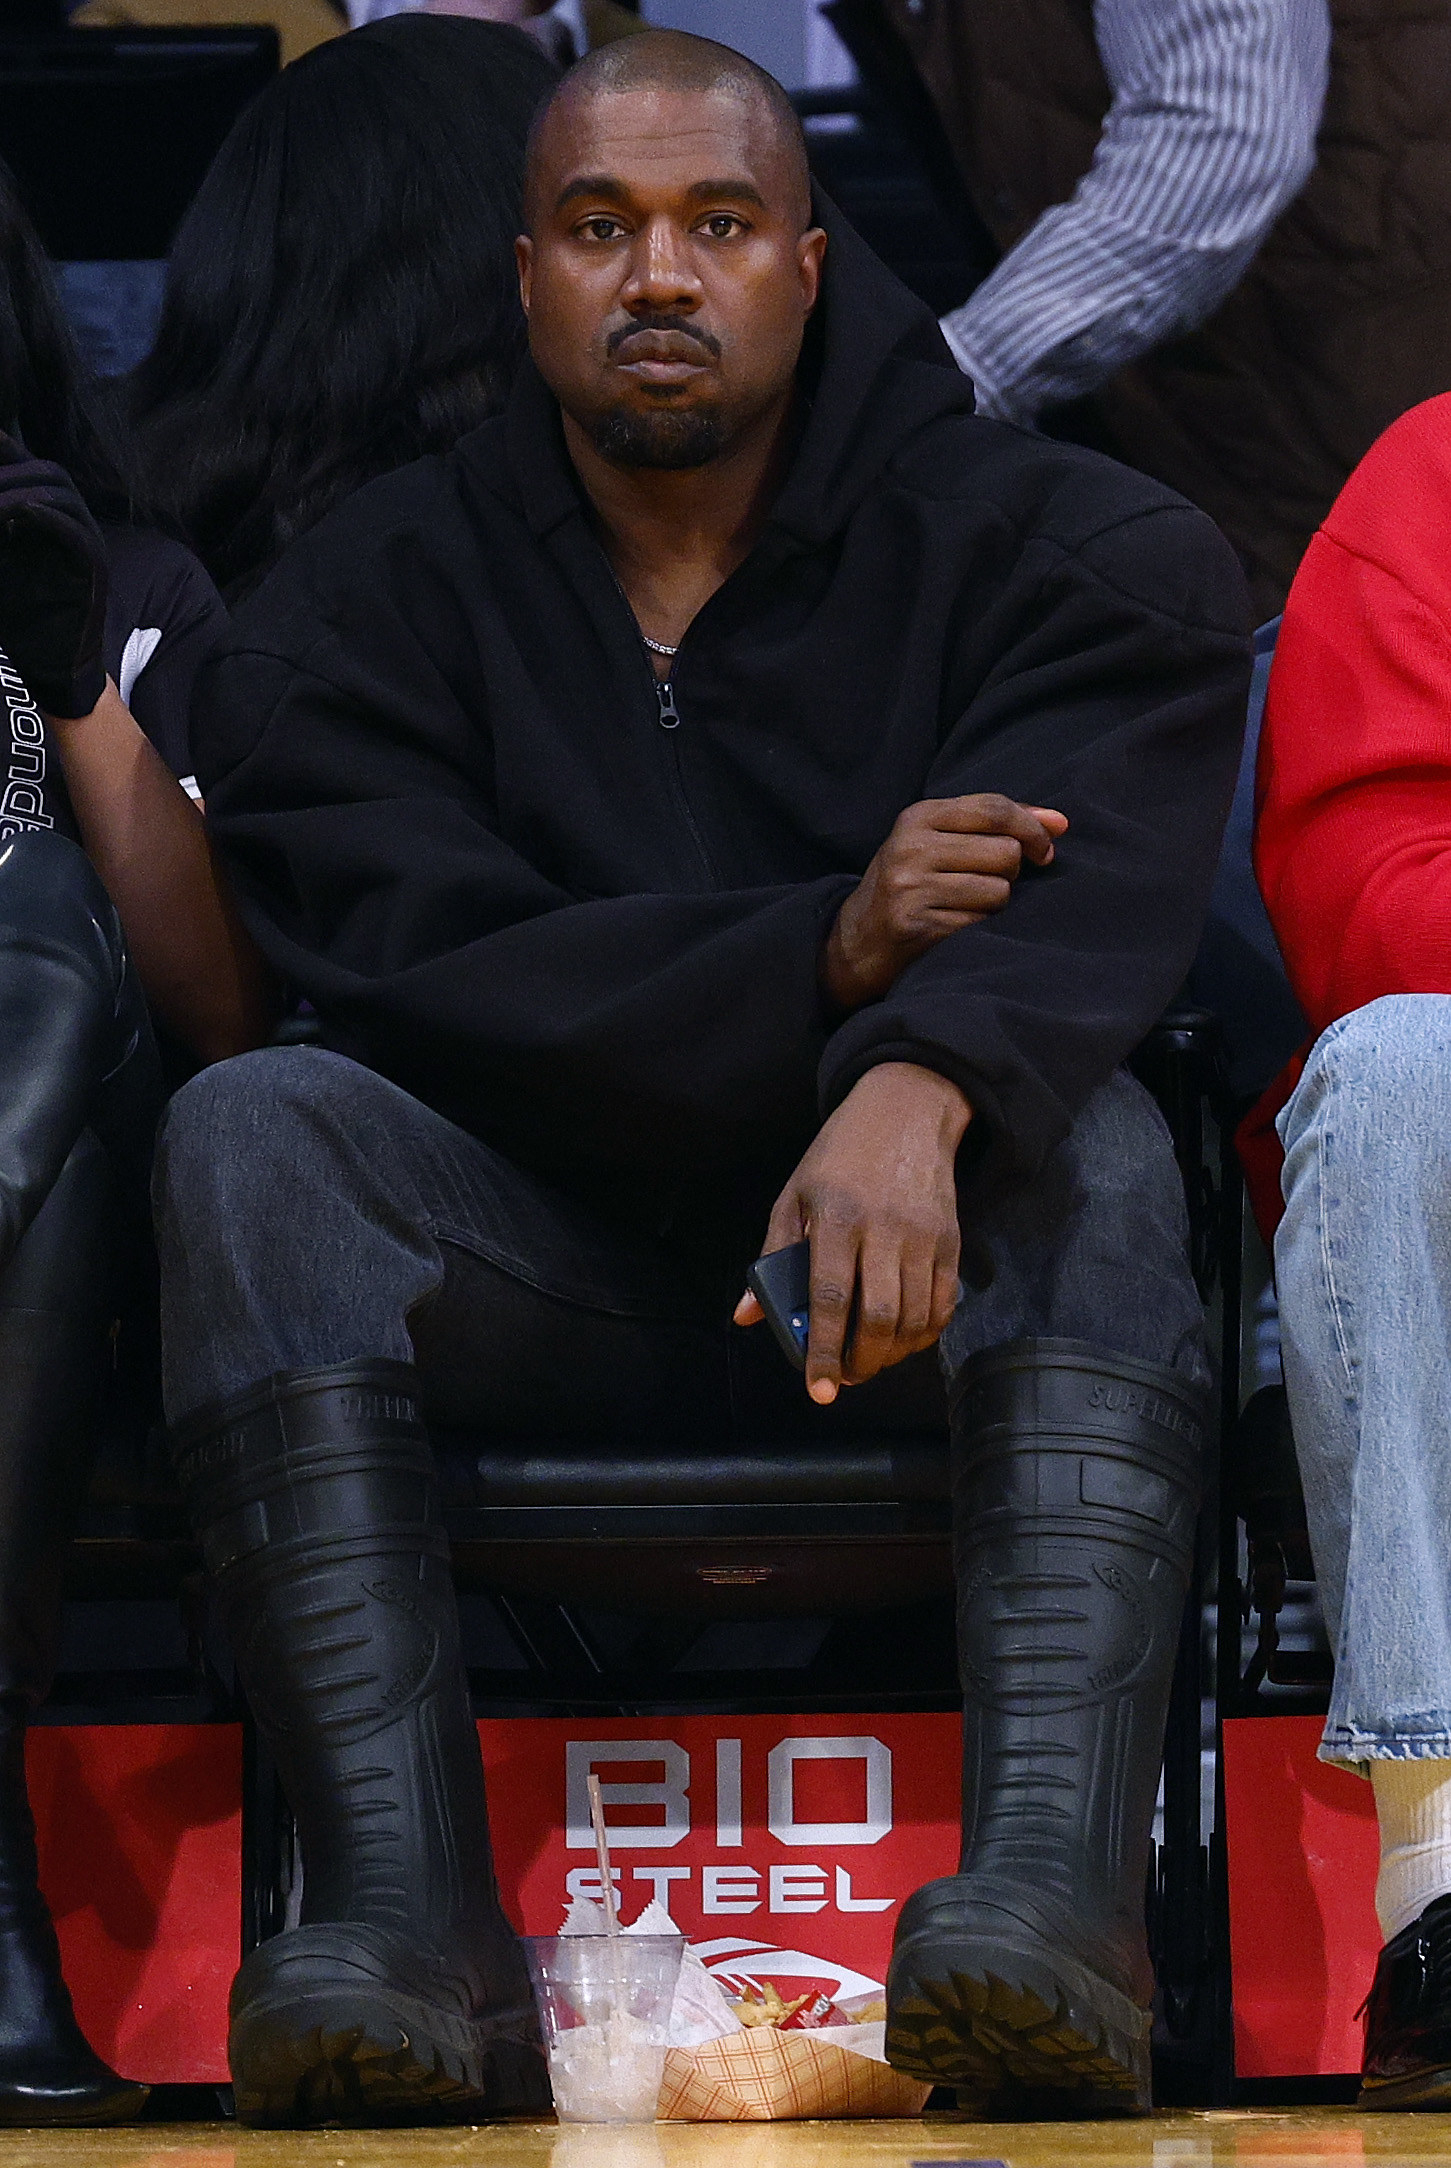 Kanye West at a game looking straight at the camera